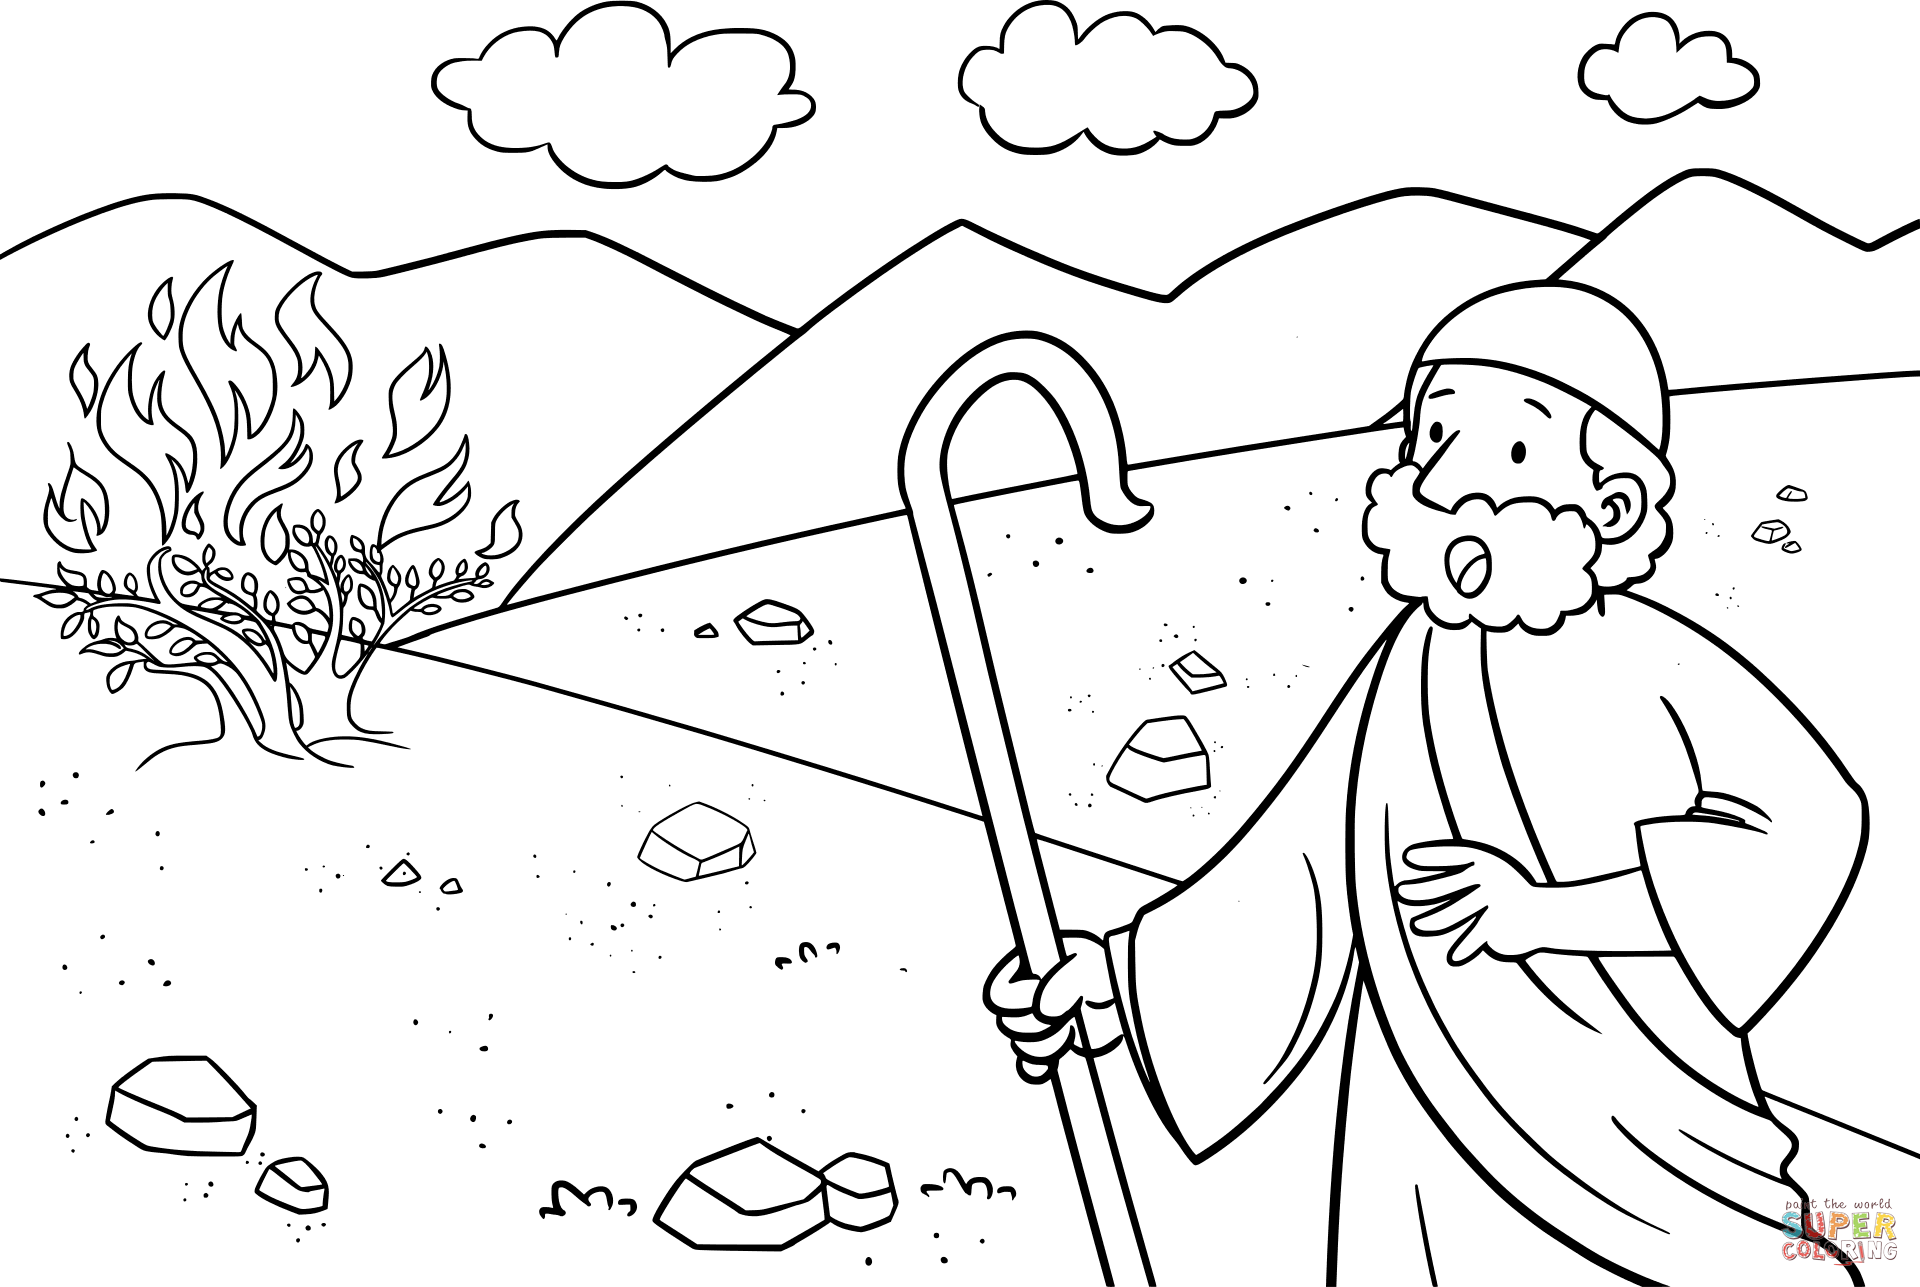 Baby Moses Coloring Page at GetColorings.com | Free printable colorings